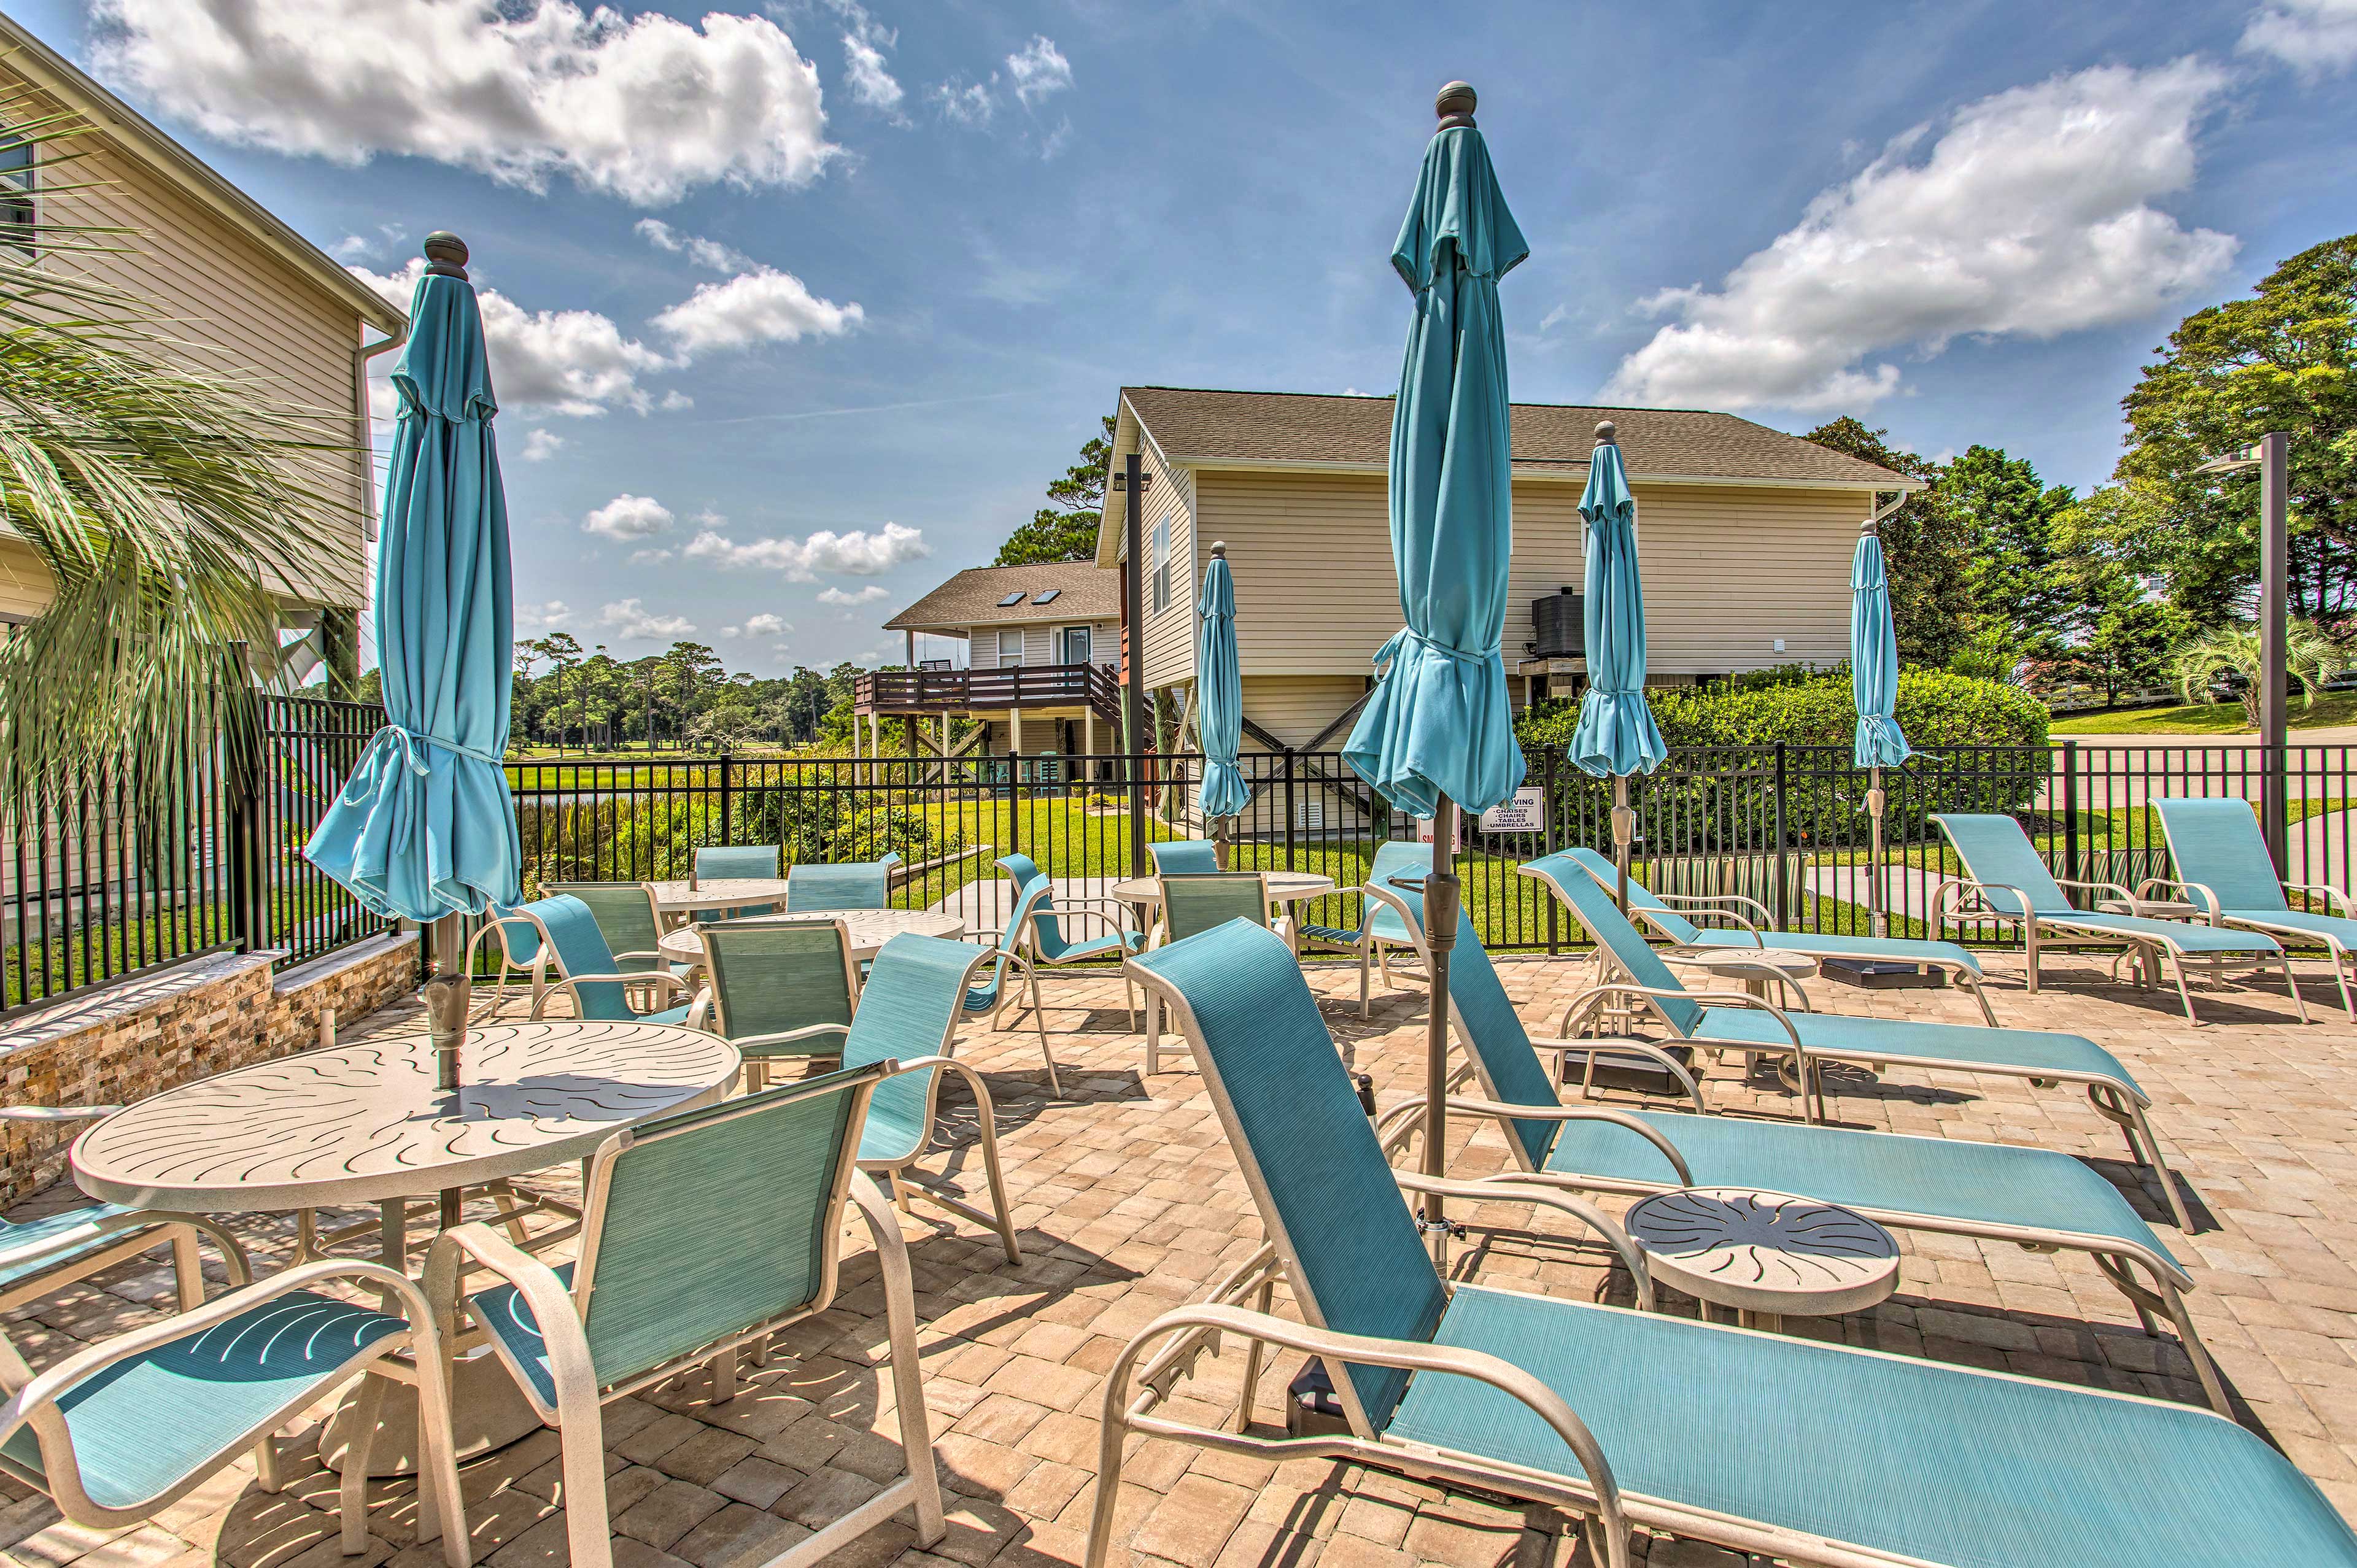 Community Outdoor Dining Area & Lounge Chairs